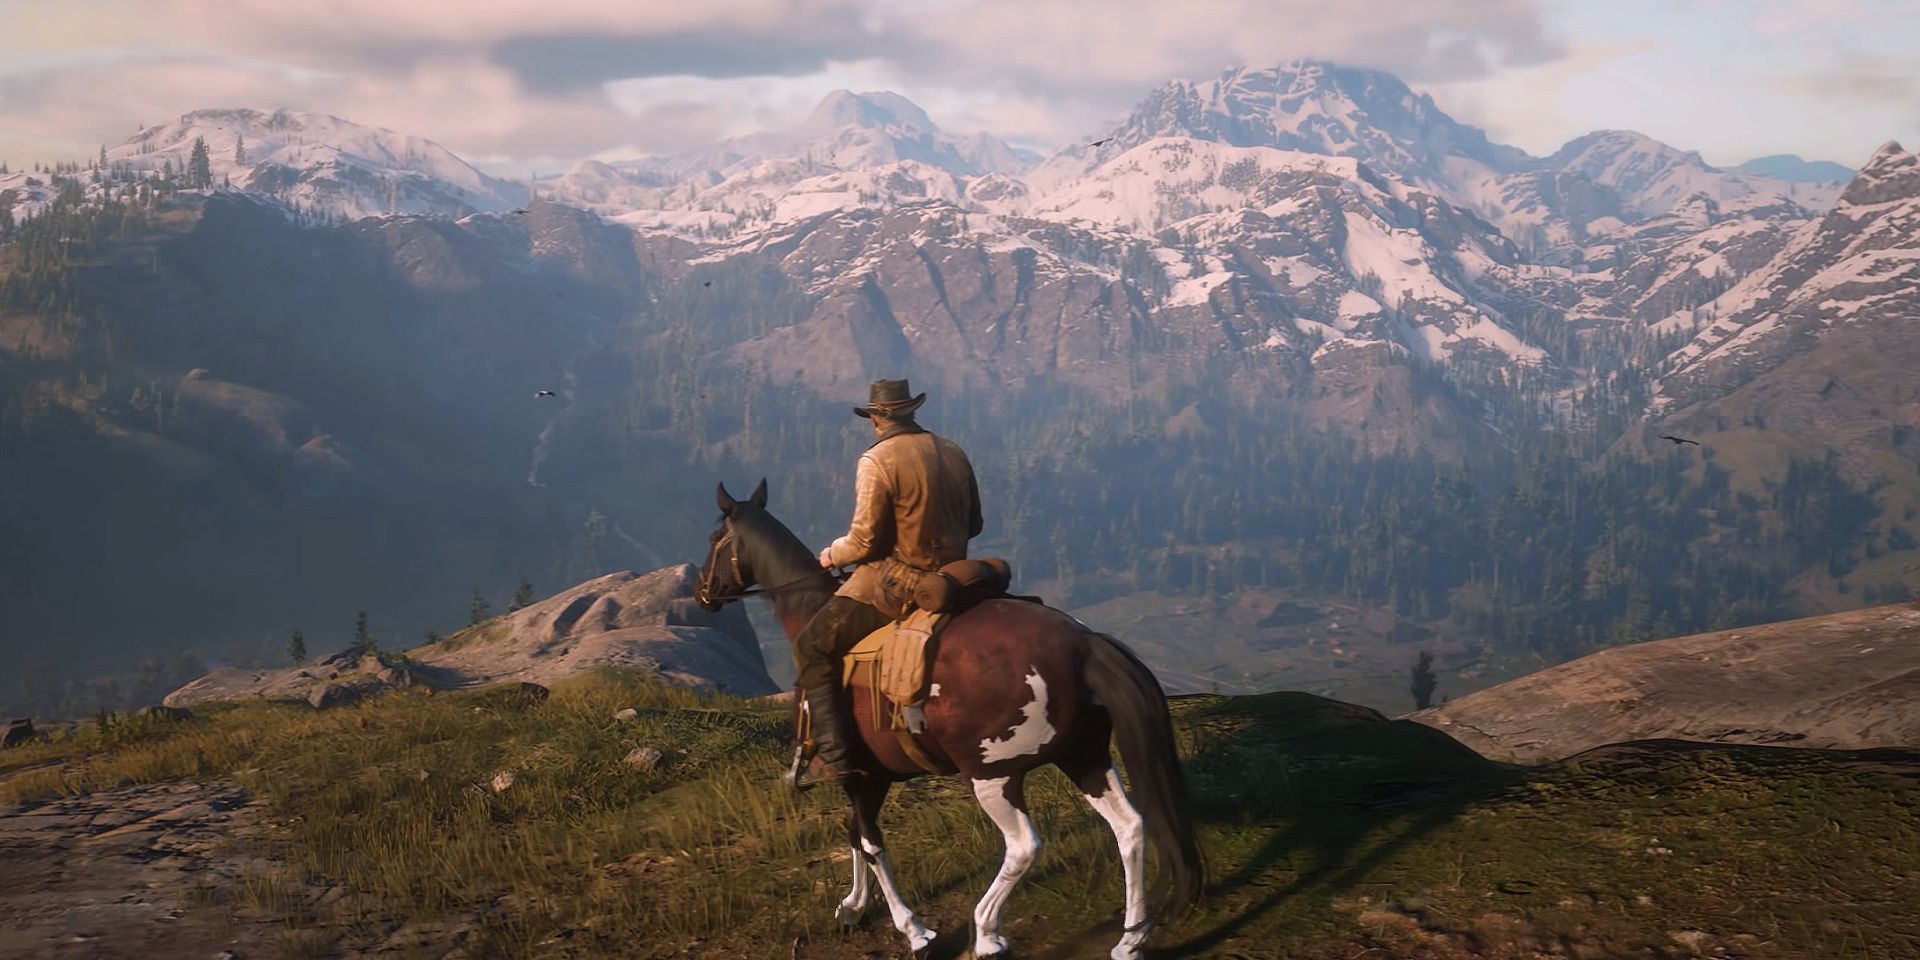 A scene from Red Dead Redemption 2